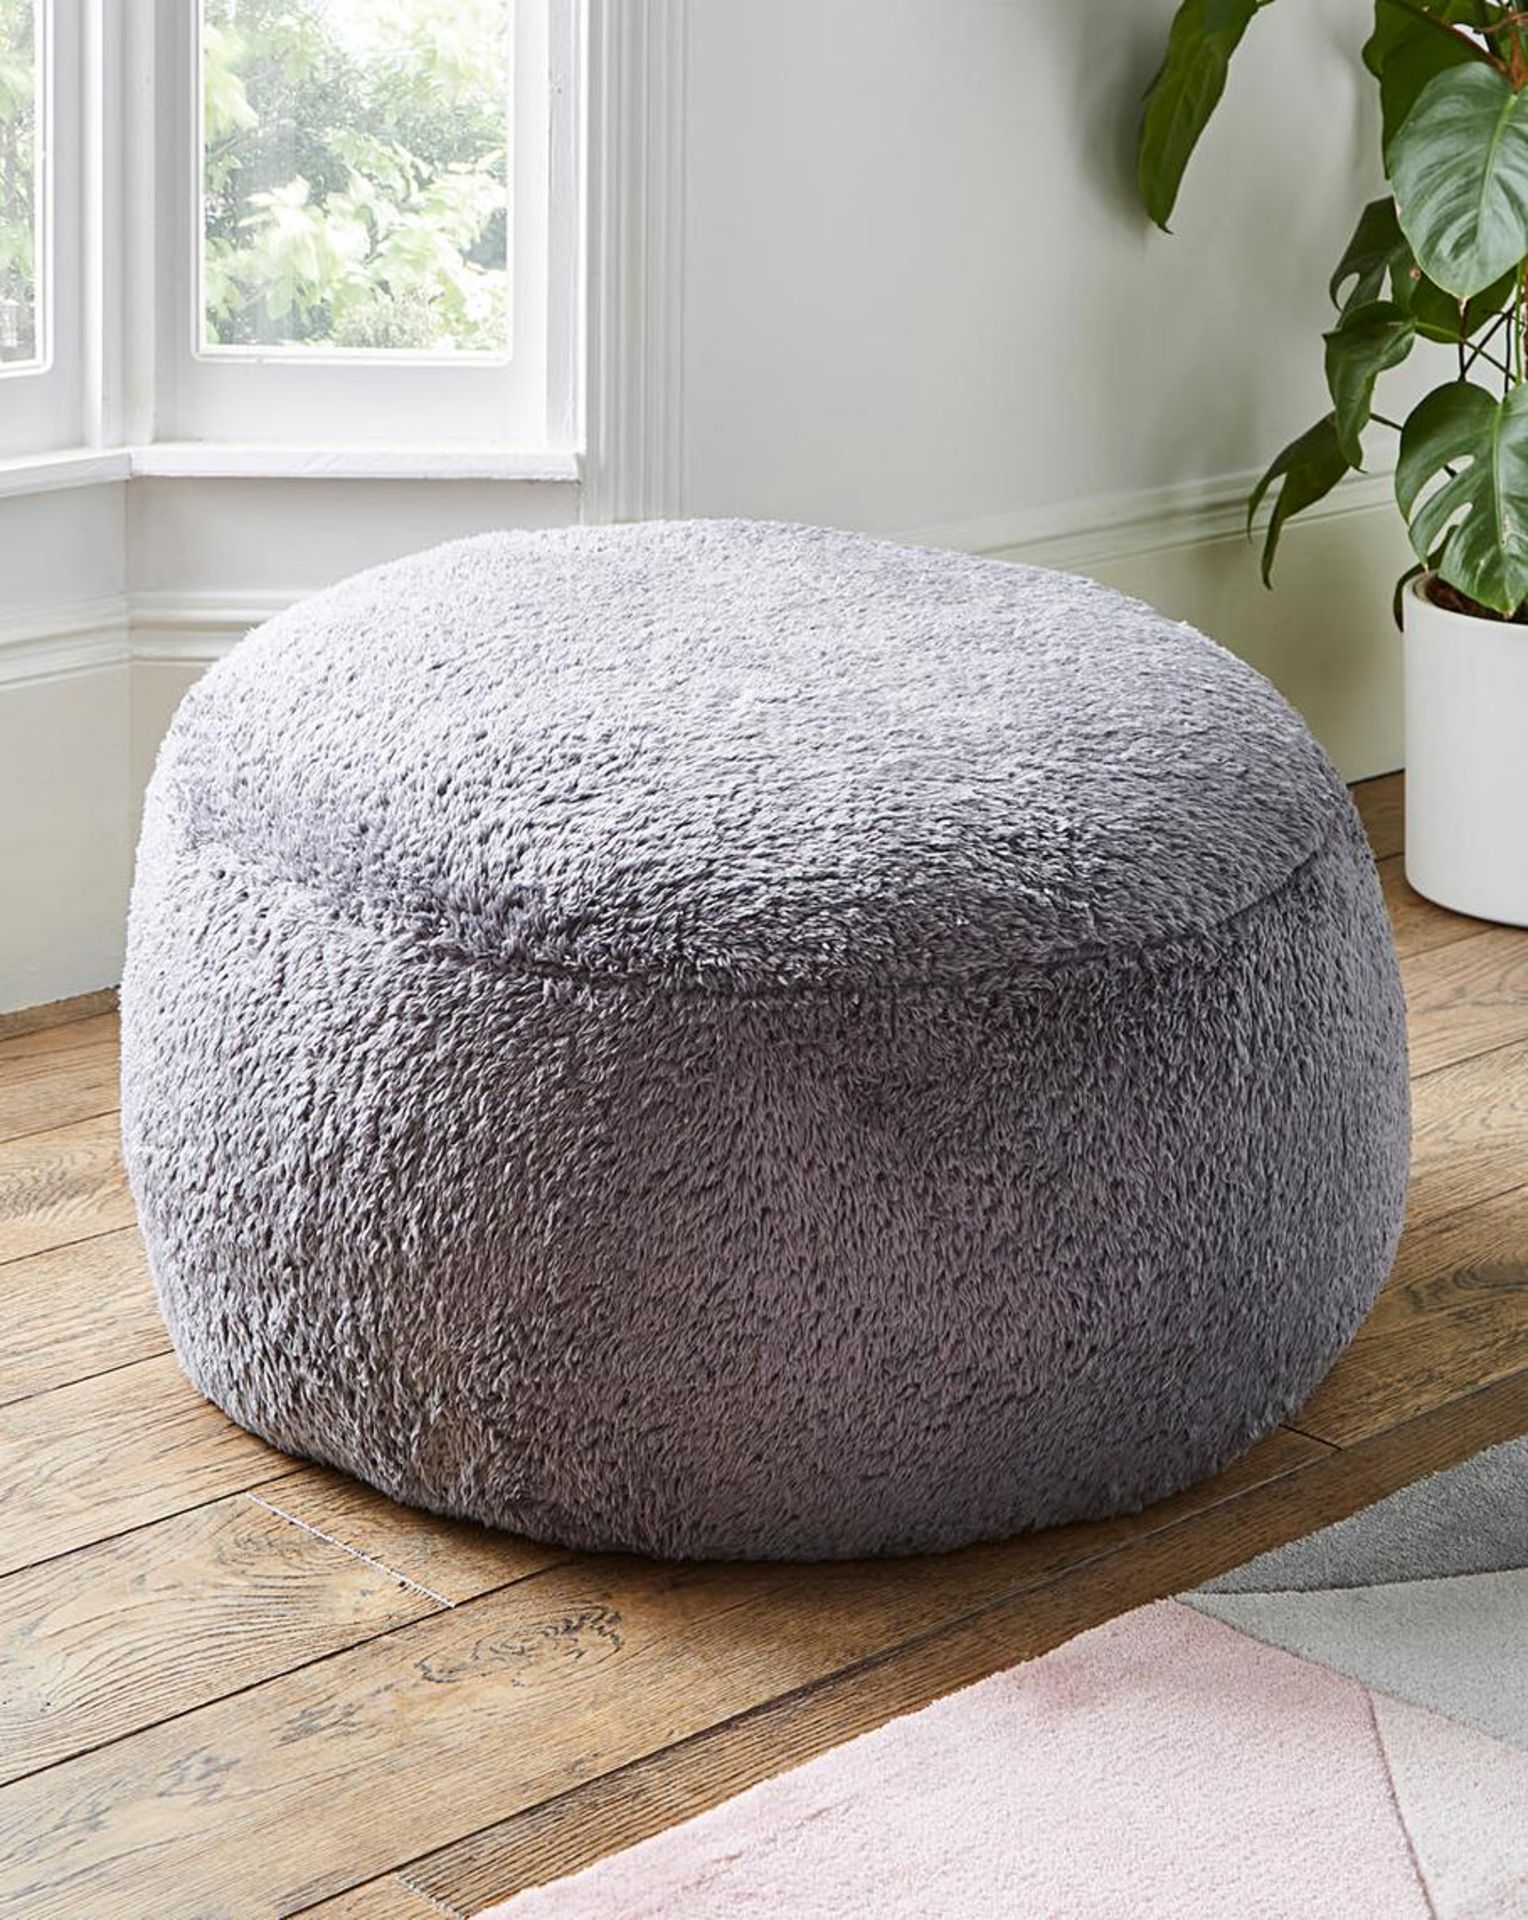 Cuddle Fleece Beanbag. RRP £77.00. - SR4. Use as a cosy extra seat or footstool while adding a